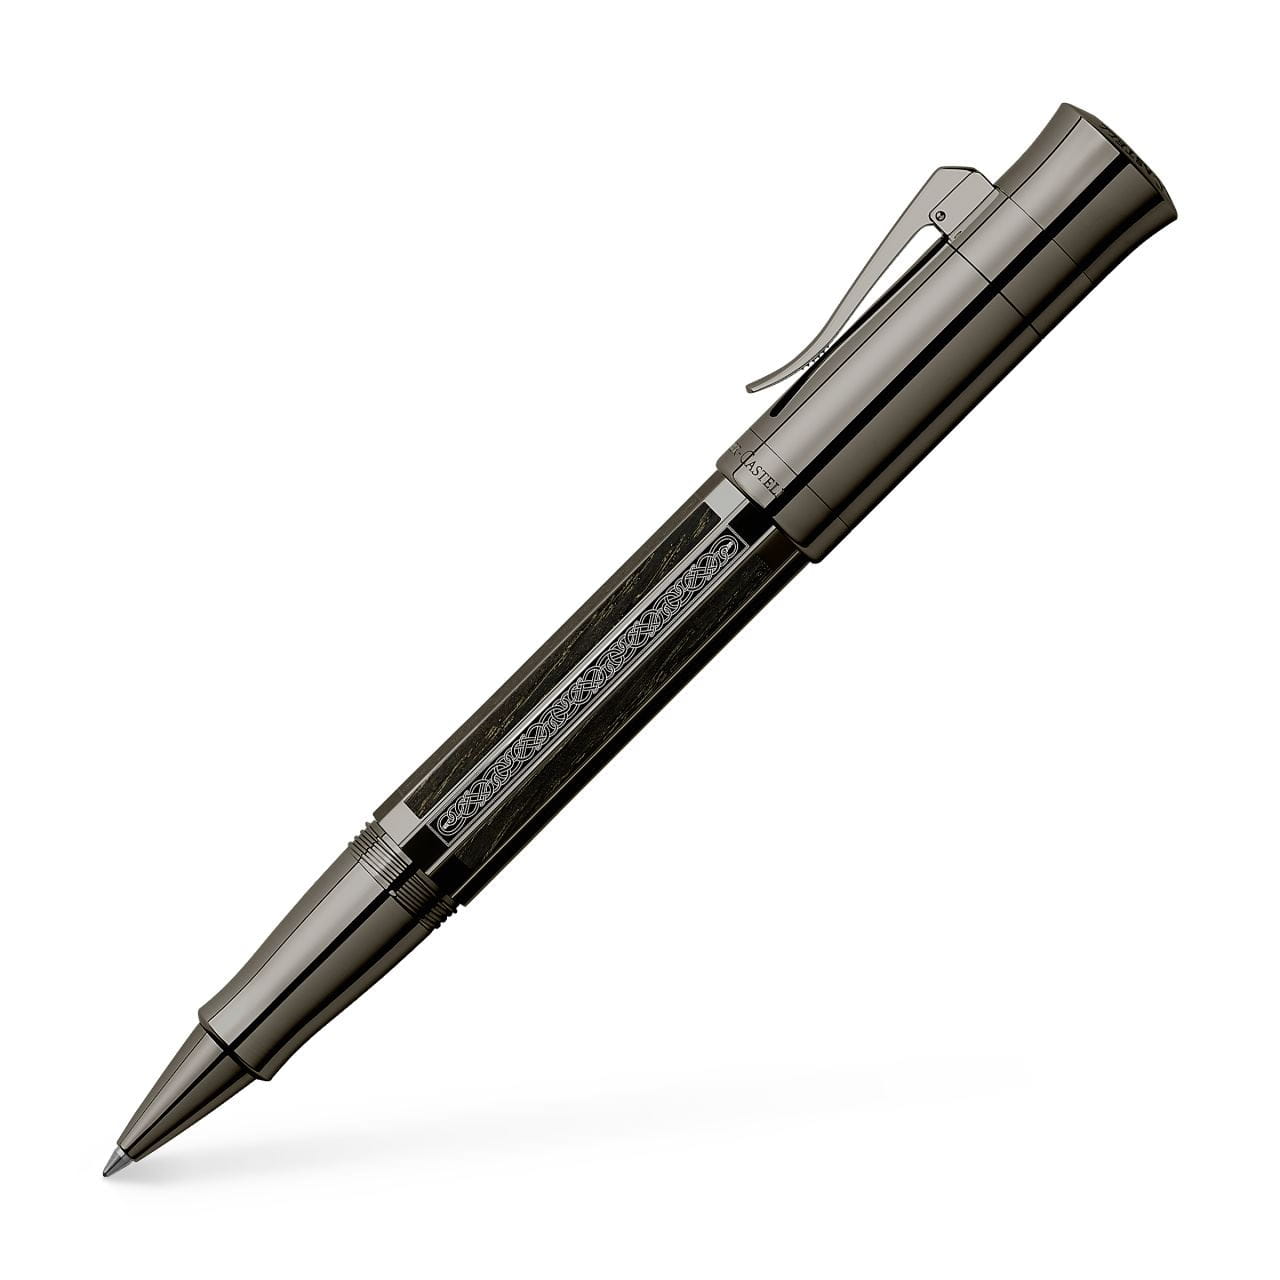 Graf-von-Faber-Castell - Rollerball pen Pen of the Year 2017 Black Edition